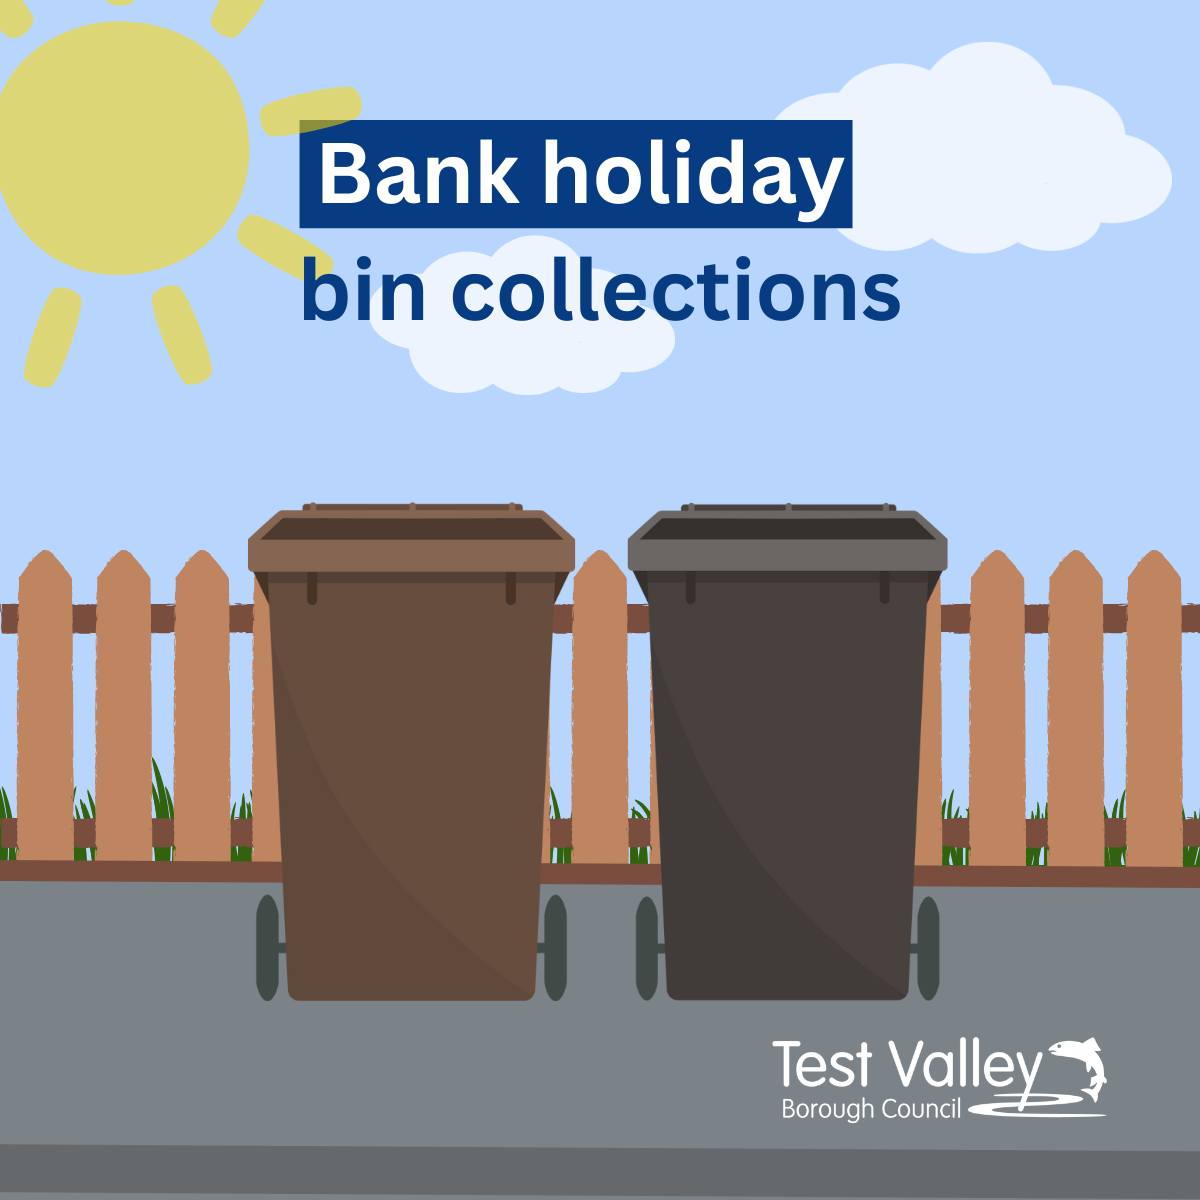 A reminder that your bins will be collected a day later than usual this week due to the bank holiday. You can check your updated schedule by visiting testvalley.gov.uk/bins.